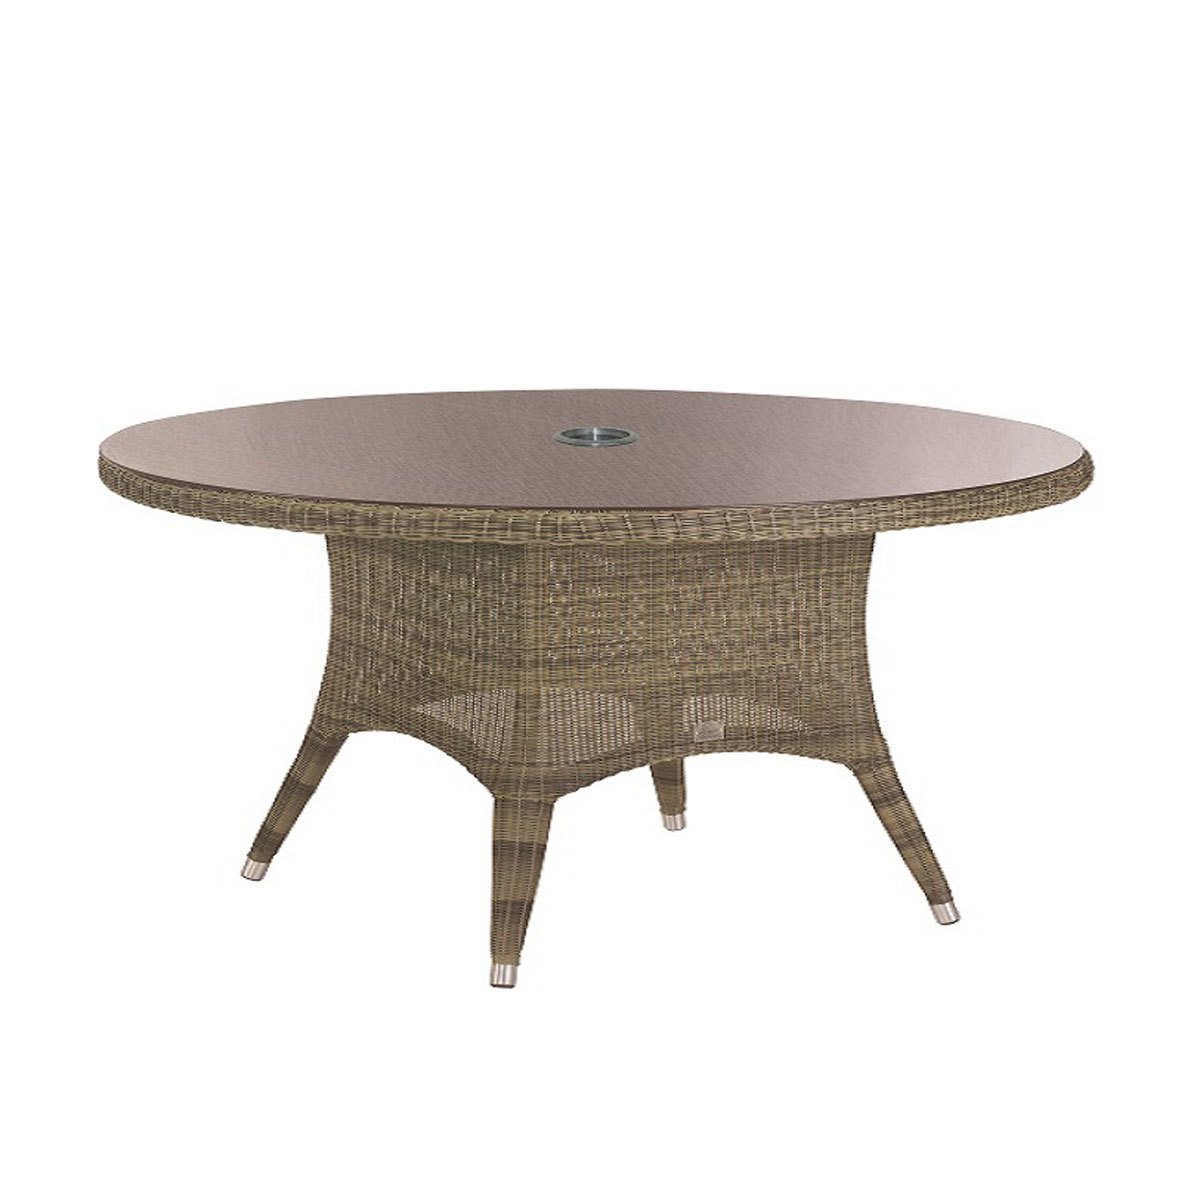 Dorset 6 Seat Dining Set with 150cm Round Table